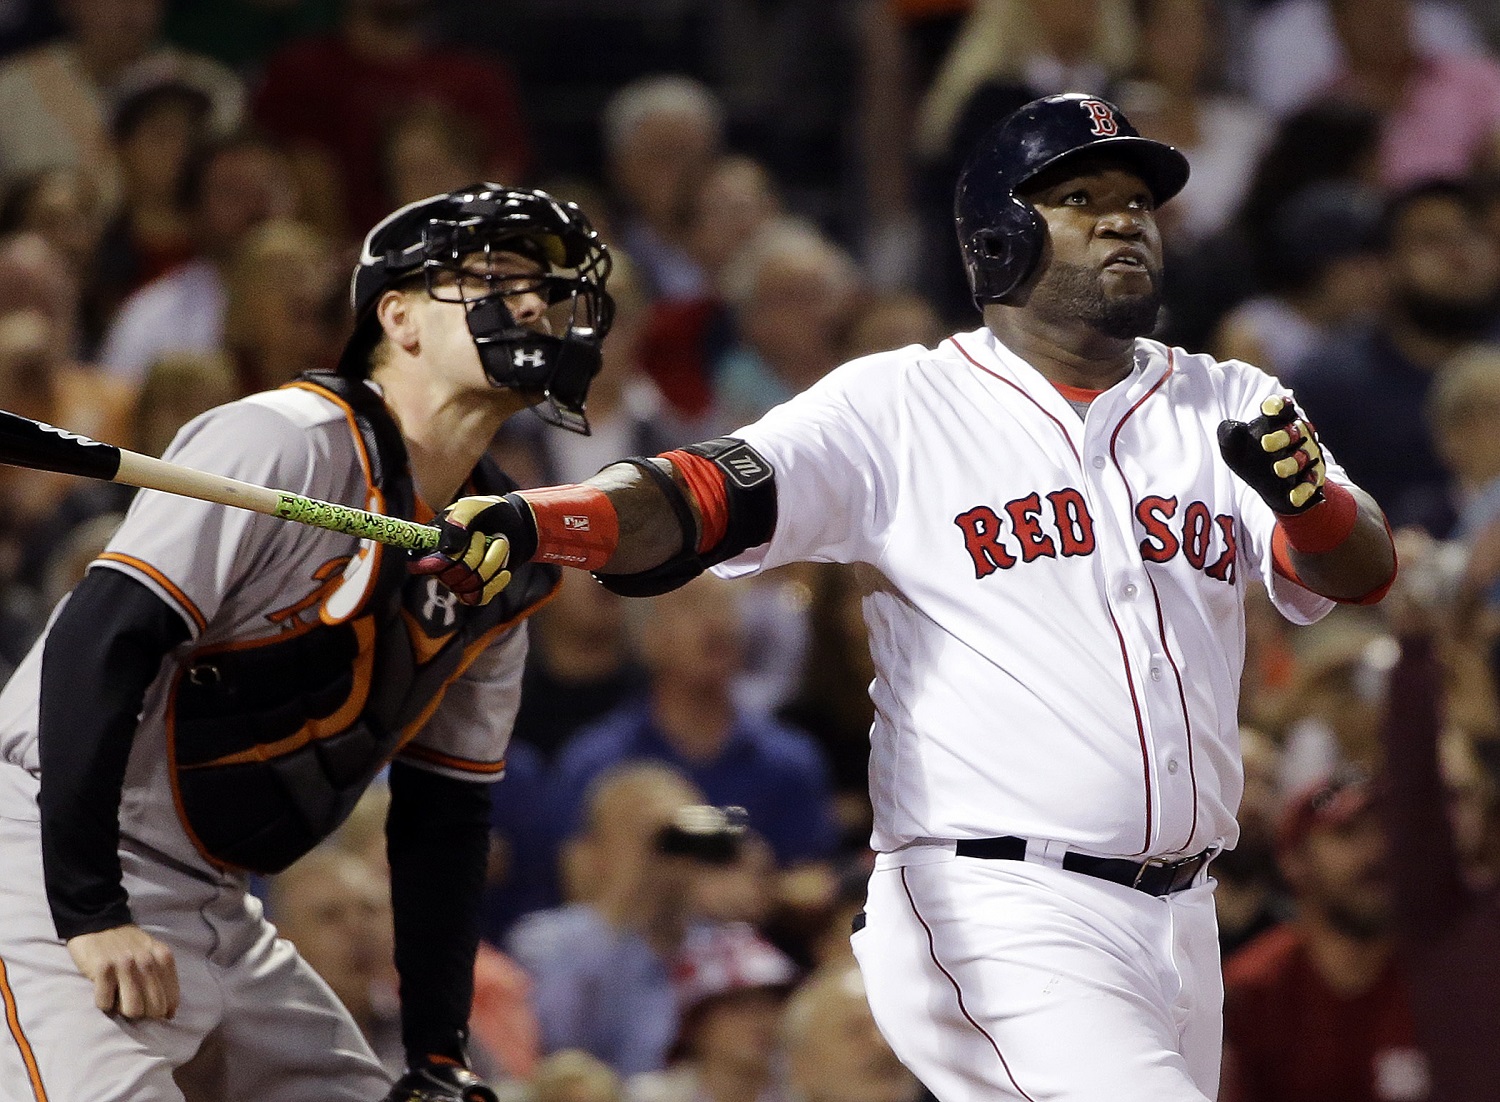 Boston Red Sox designated hitter David Ortiz, right, hits a solo homer as Baltimore Orioles catcher Matt Wieters watches in the sixth inning of a baseball game at Fenway Park, Monday, Sept. 12, 2016, in Boston. (AP Photo/Elise Amendola)